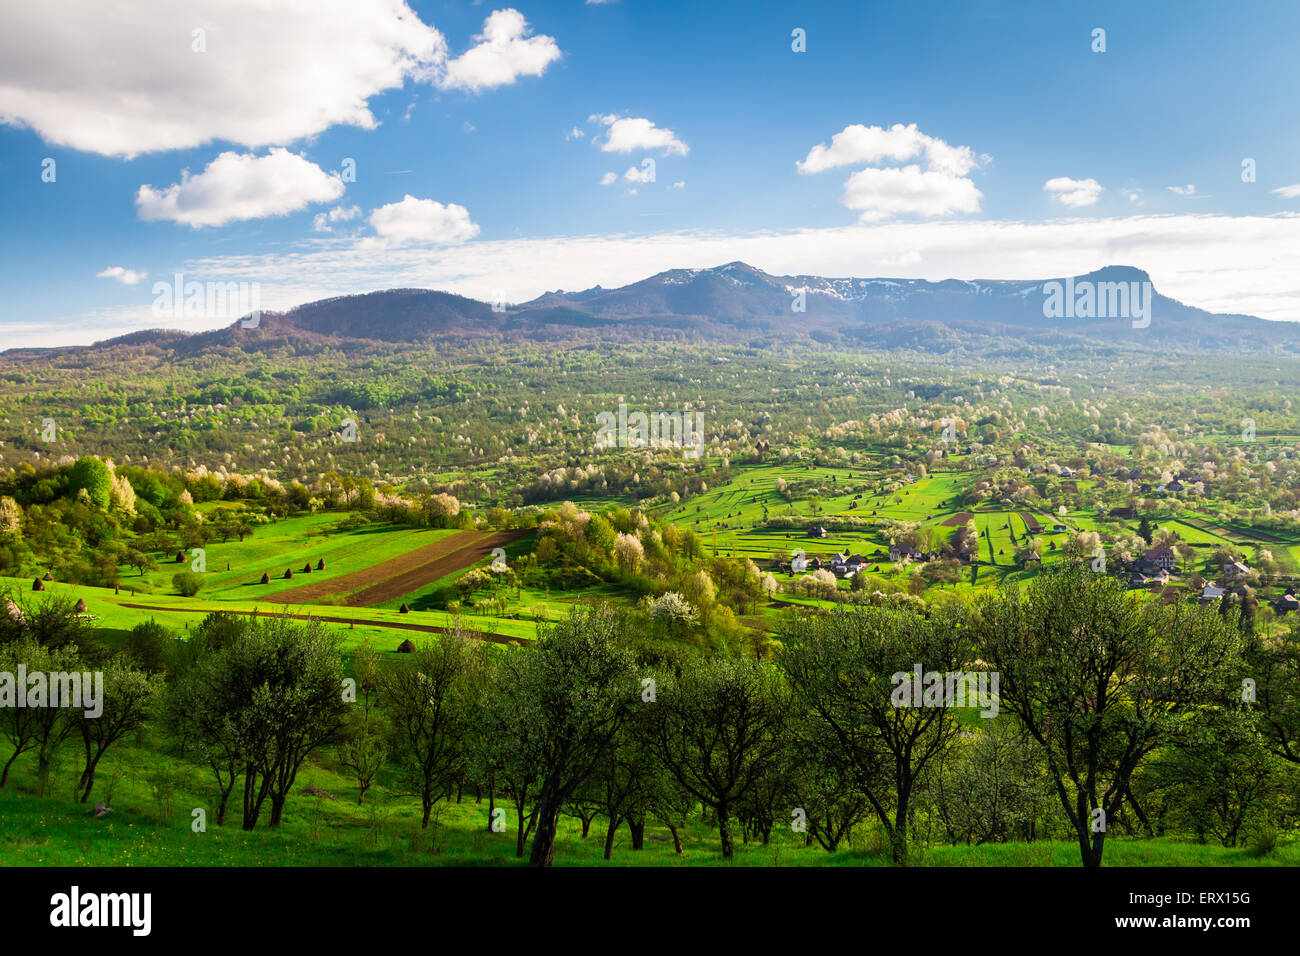 Landscape in Maramures, Romania. Green pastures with trees, a village and a mountain in the background Stock Photo